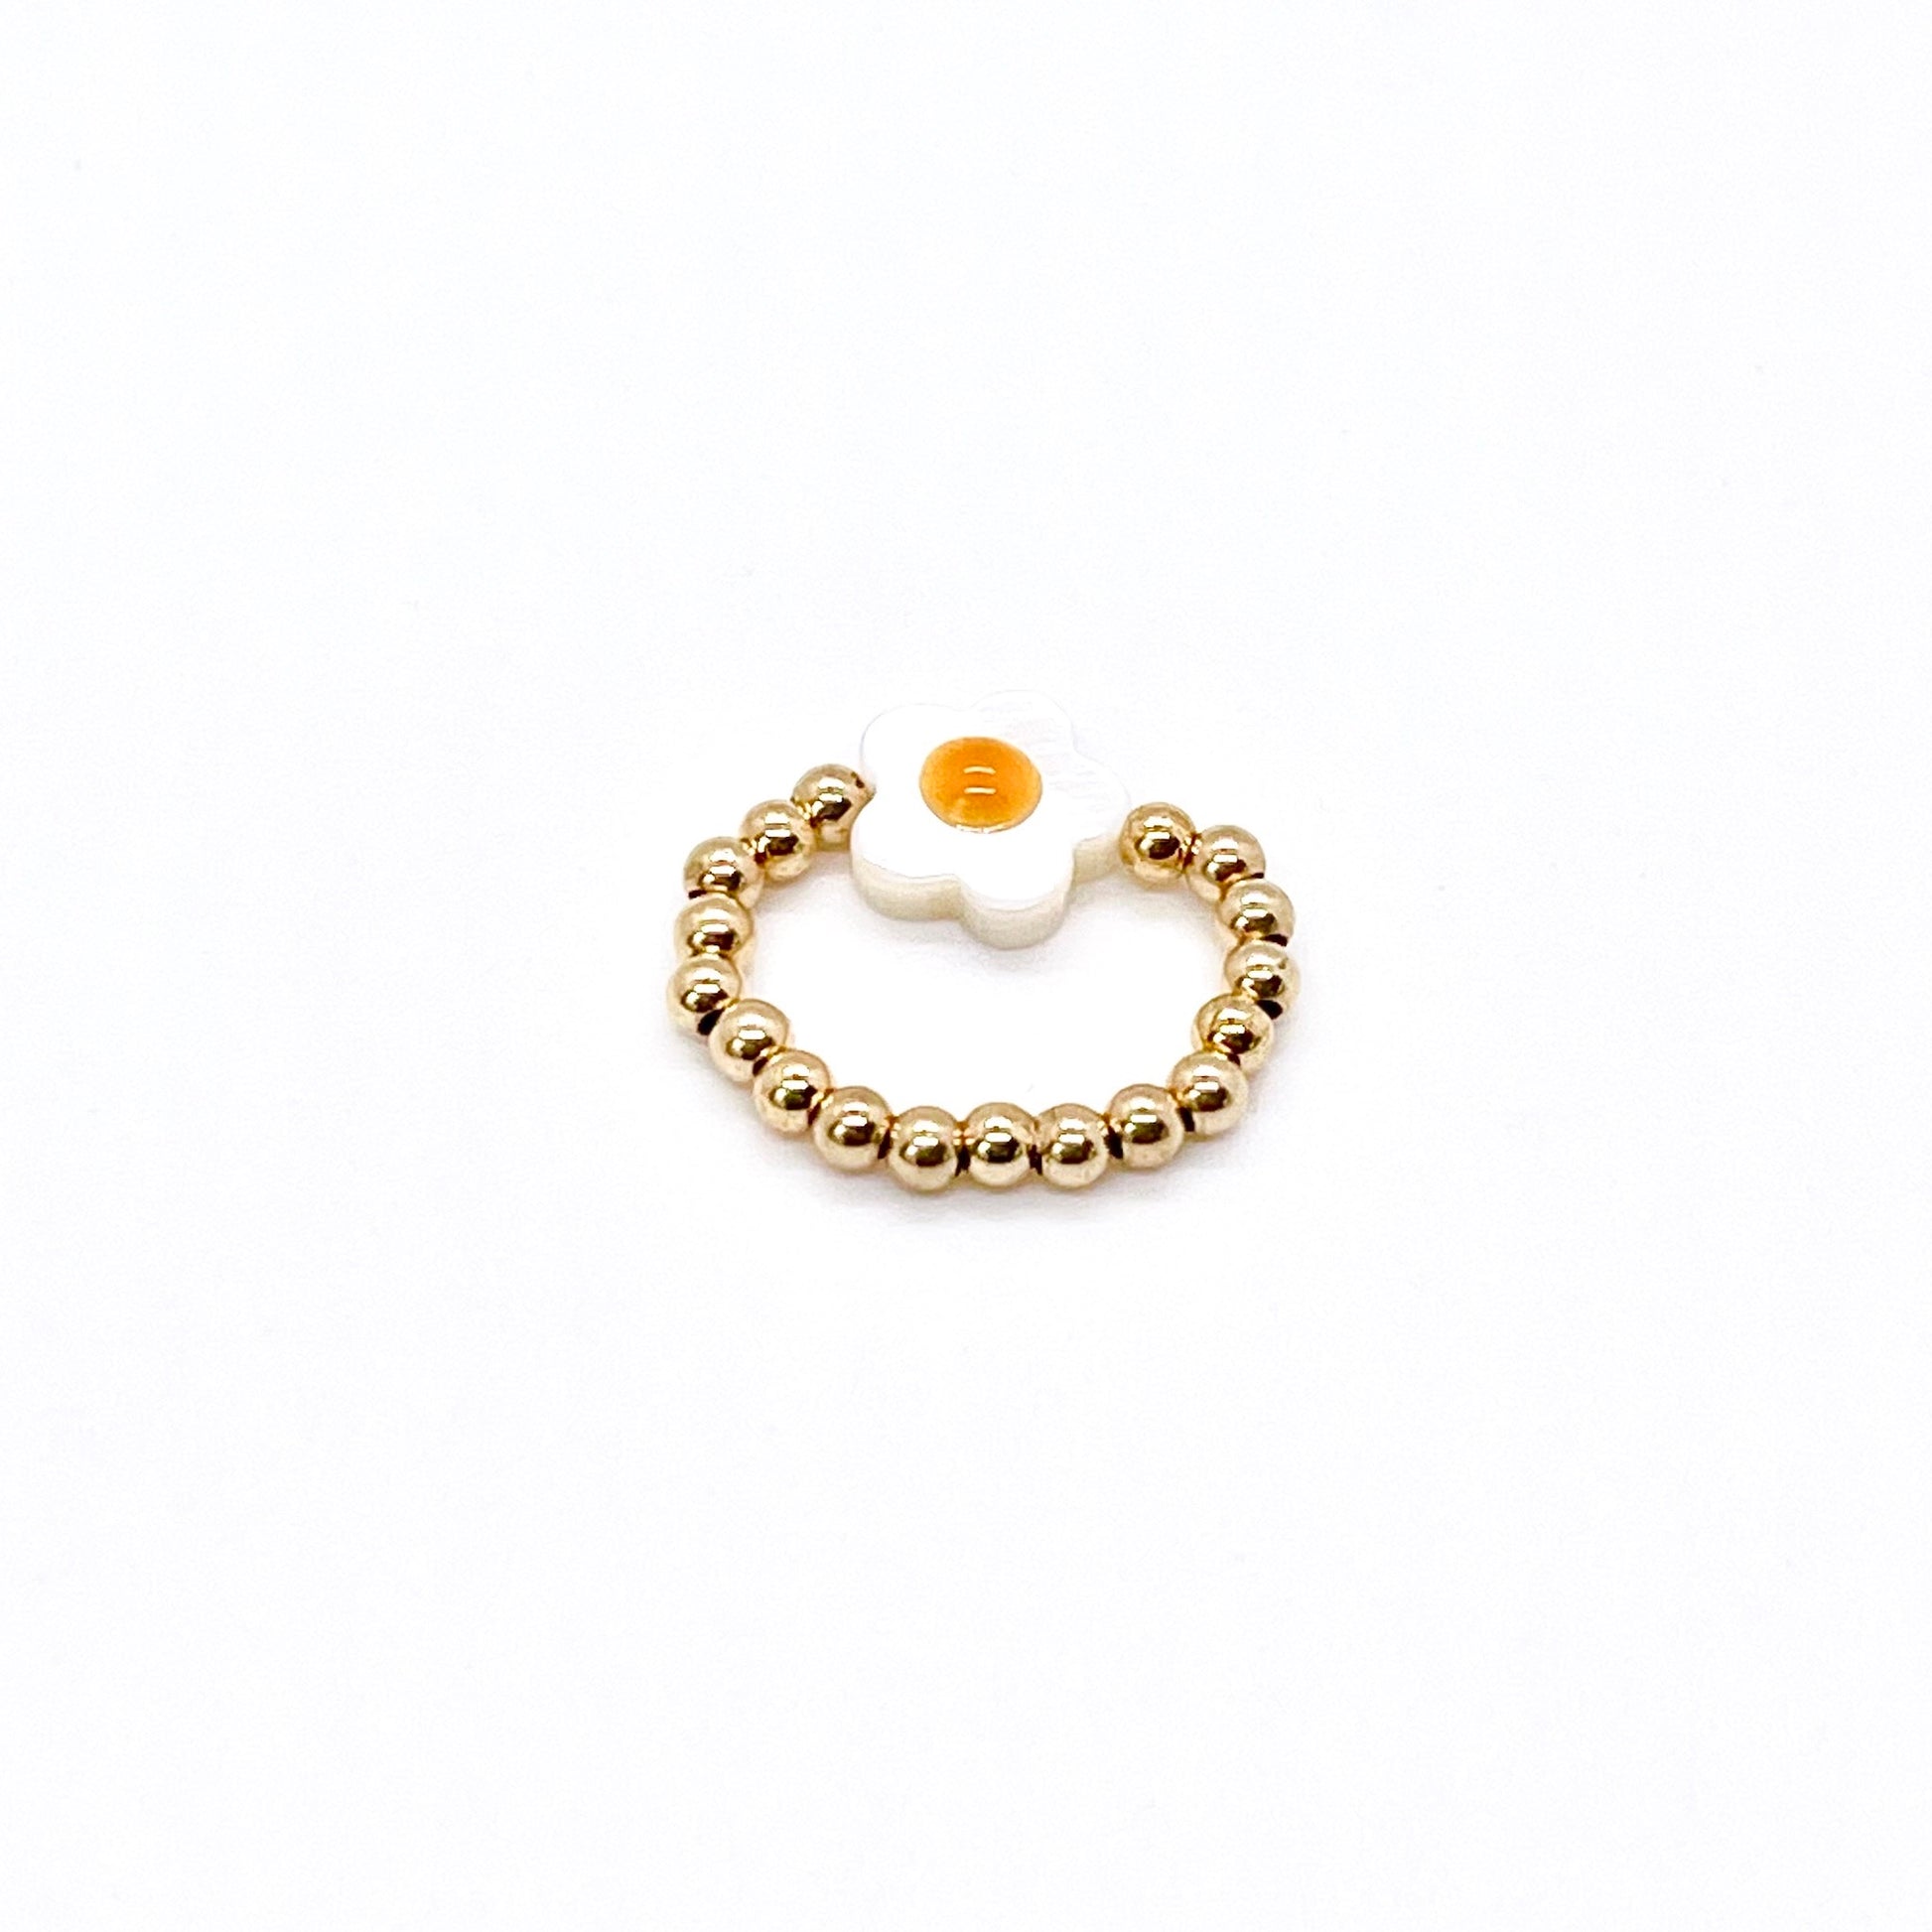 Beaded flower ring with 3mm 14K gold filled beads on stretch cord.